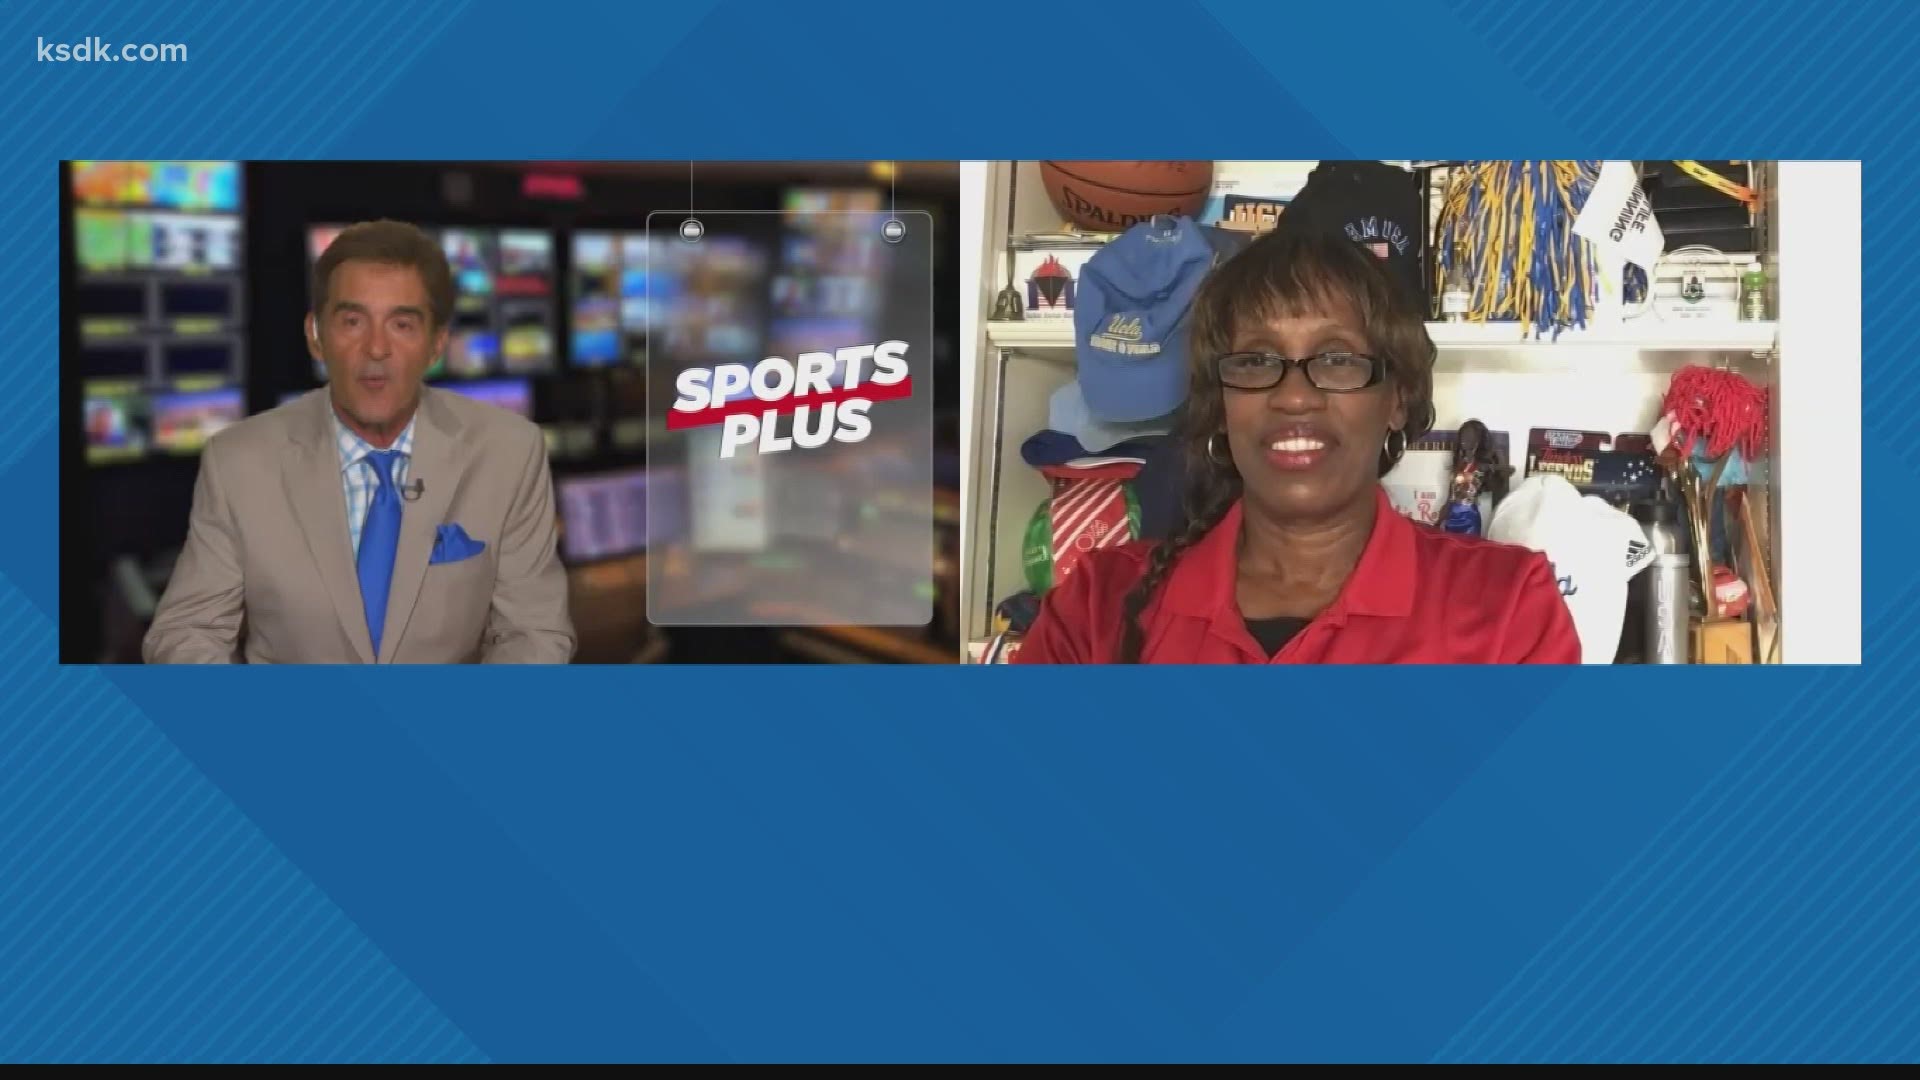 5 On Your Side's Frank Cusumano sat down for a one-on-one with Jackie Joyner-Kersee.